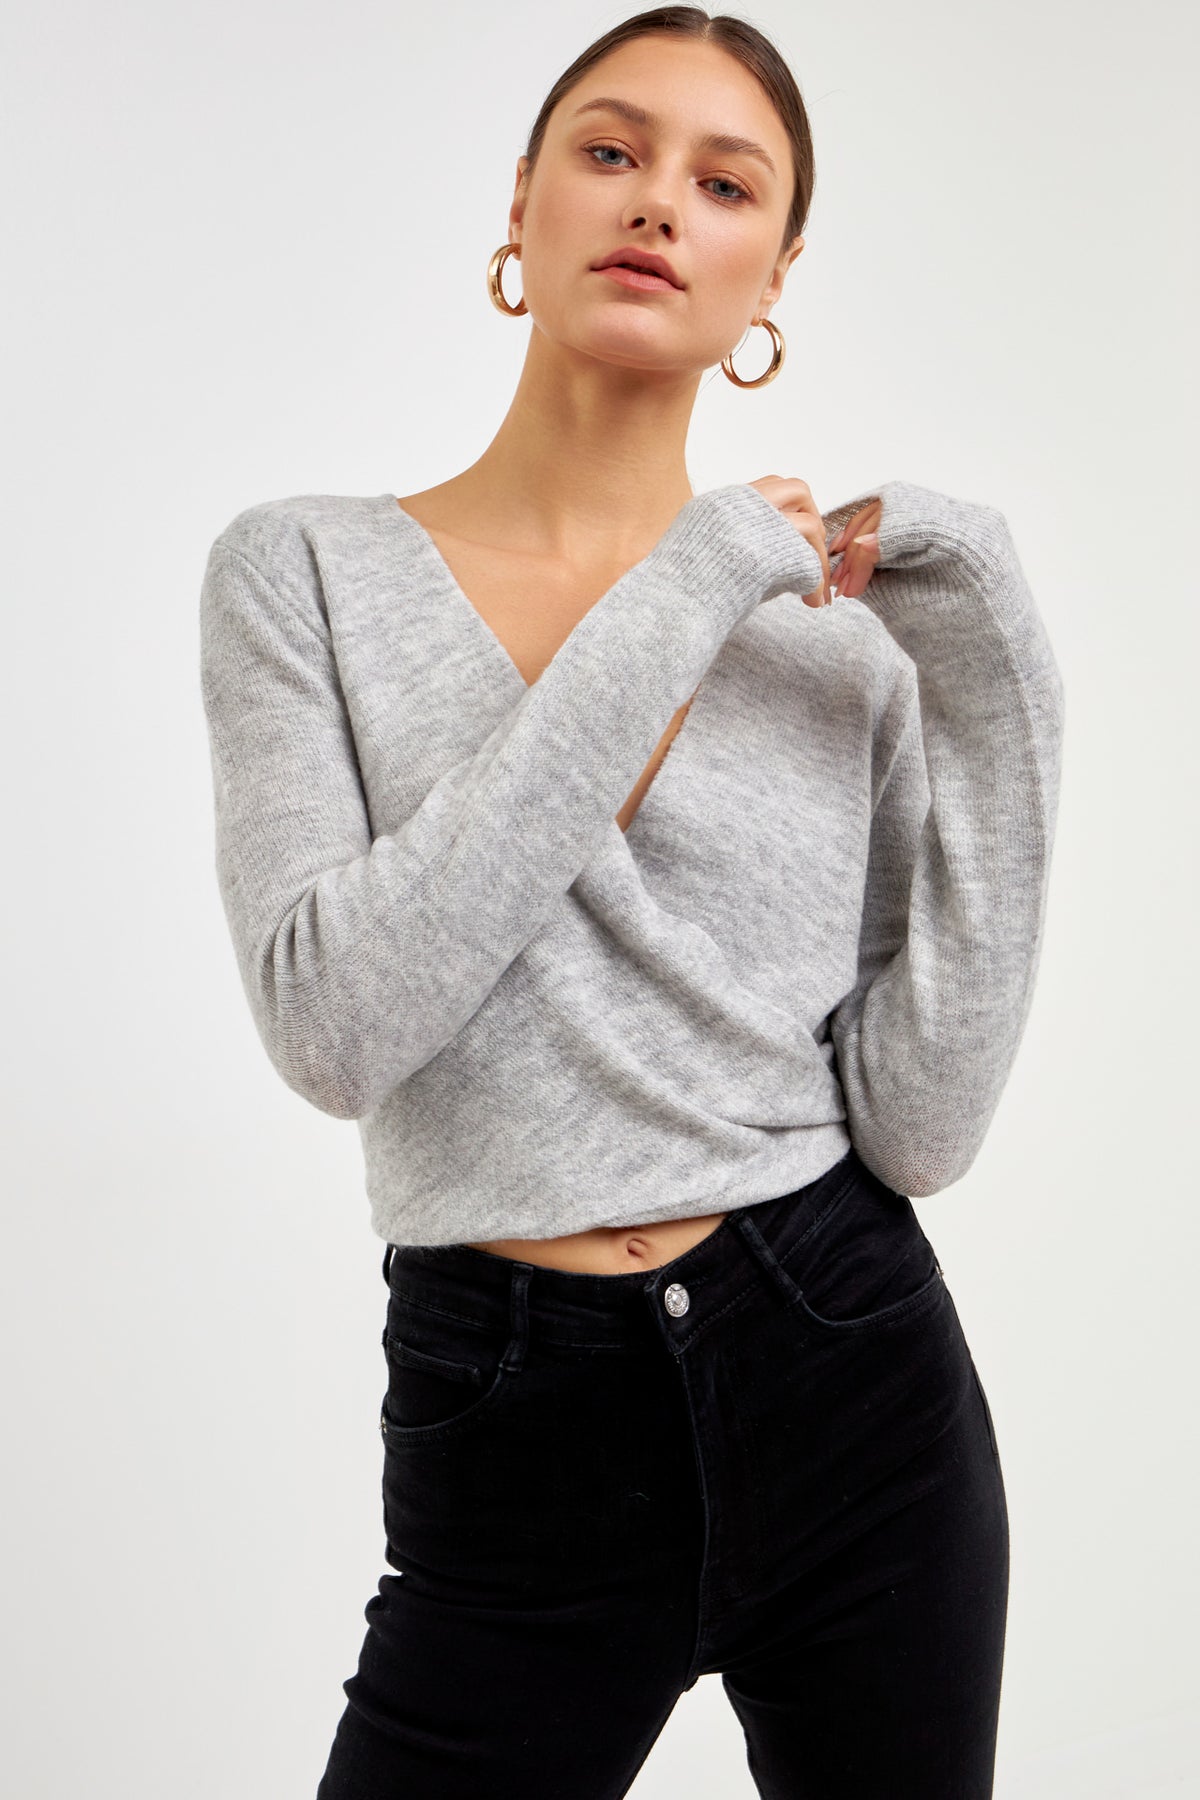 ENDLESS ROSE - Wrapped Knit Top - TOPS available at Objectrare